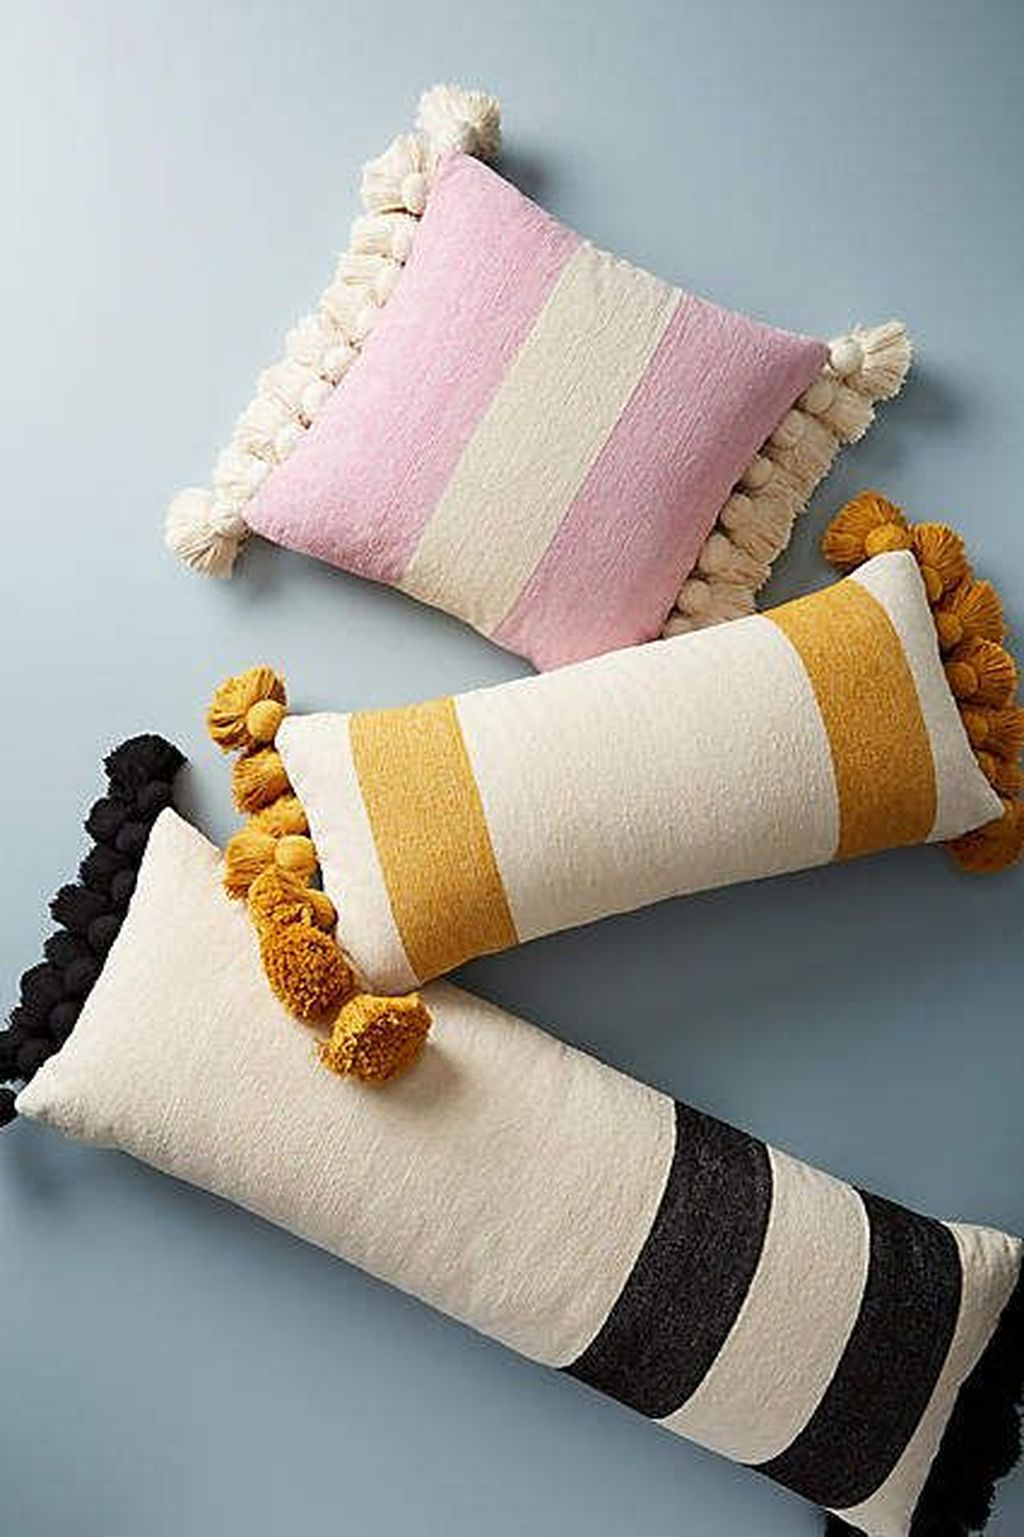 Charming Pillow Decorative Ideas To Apply Asap 30